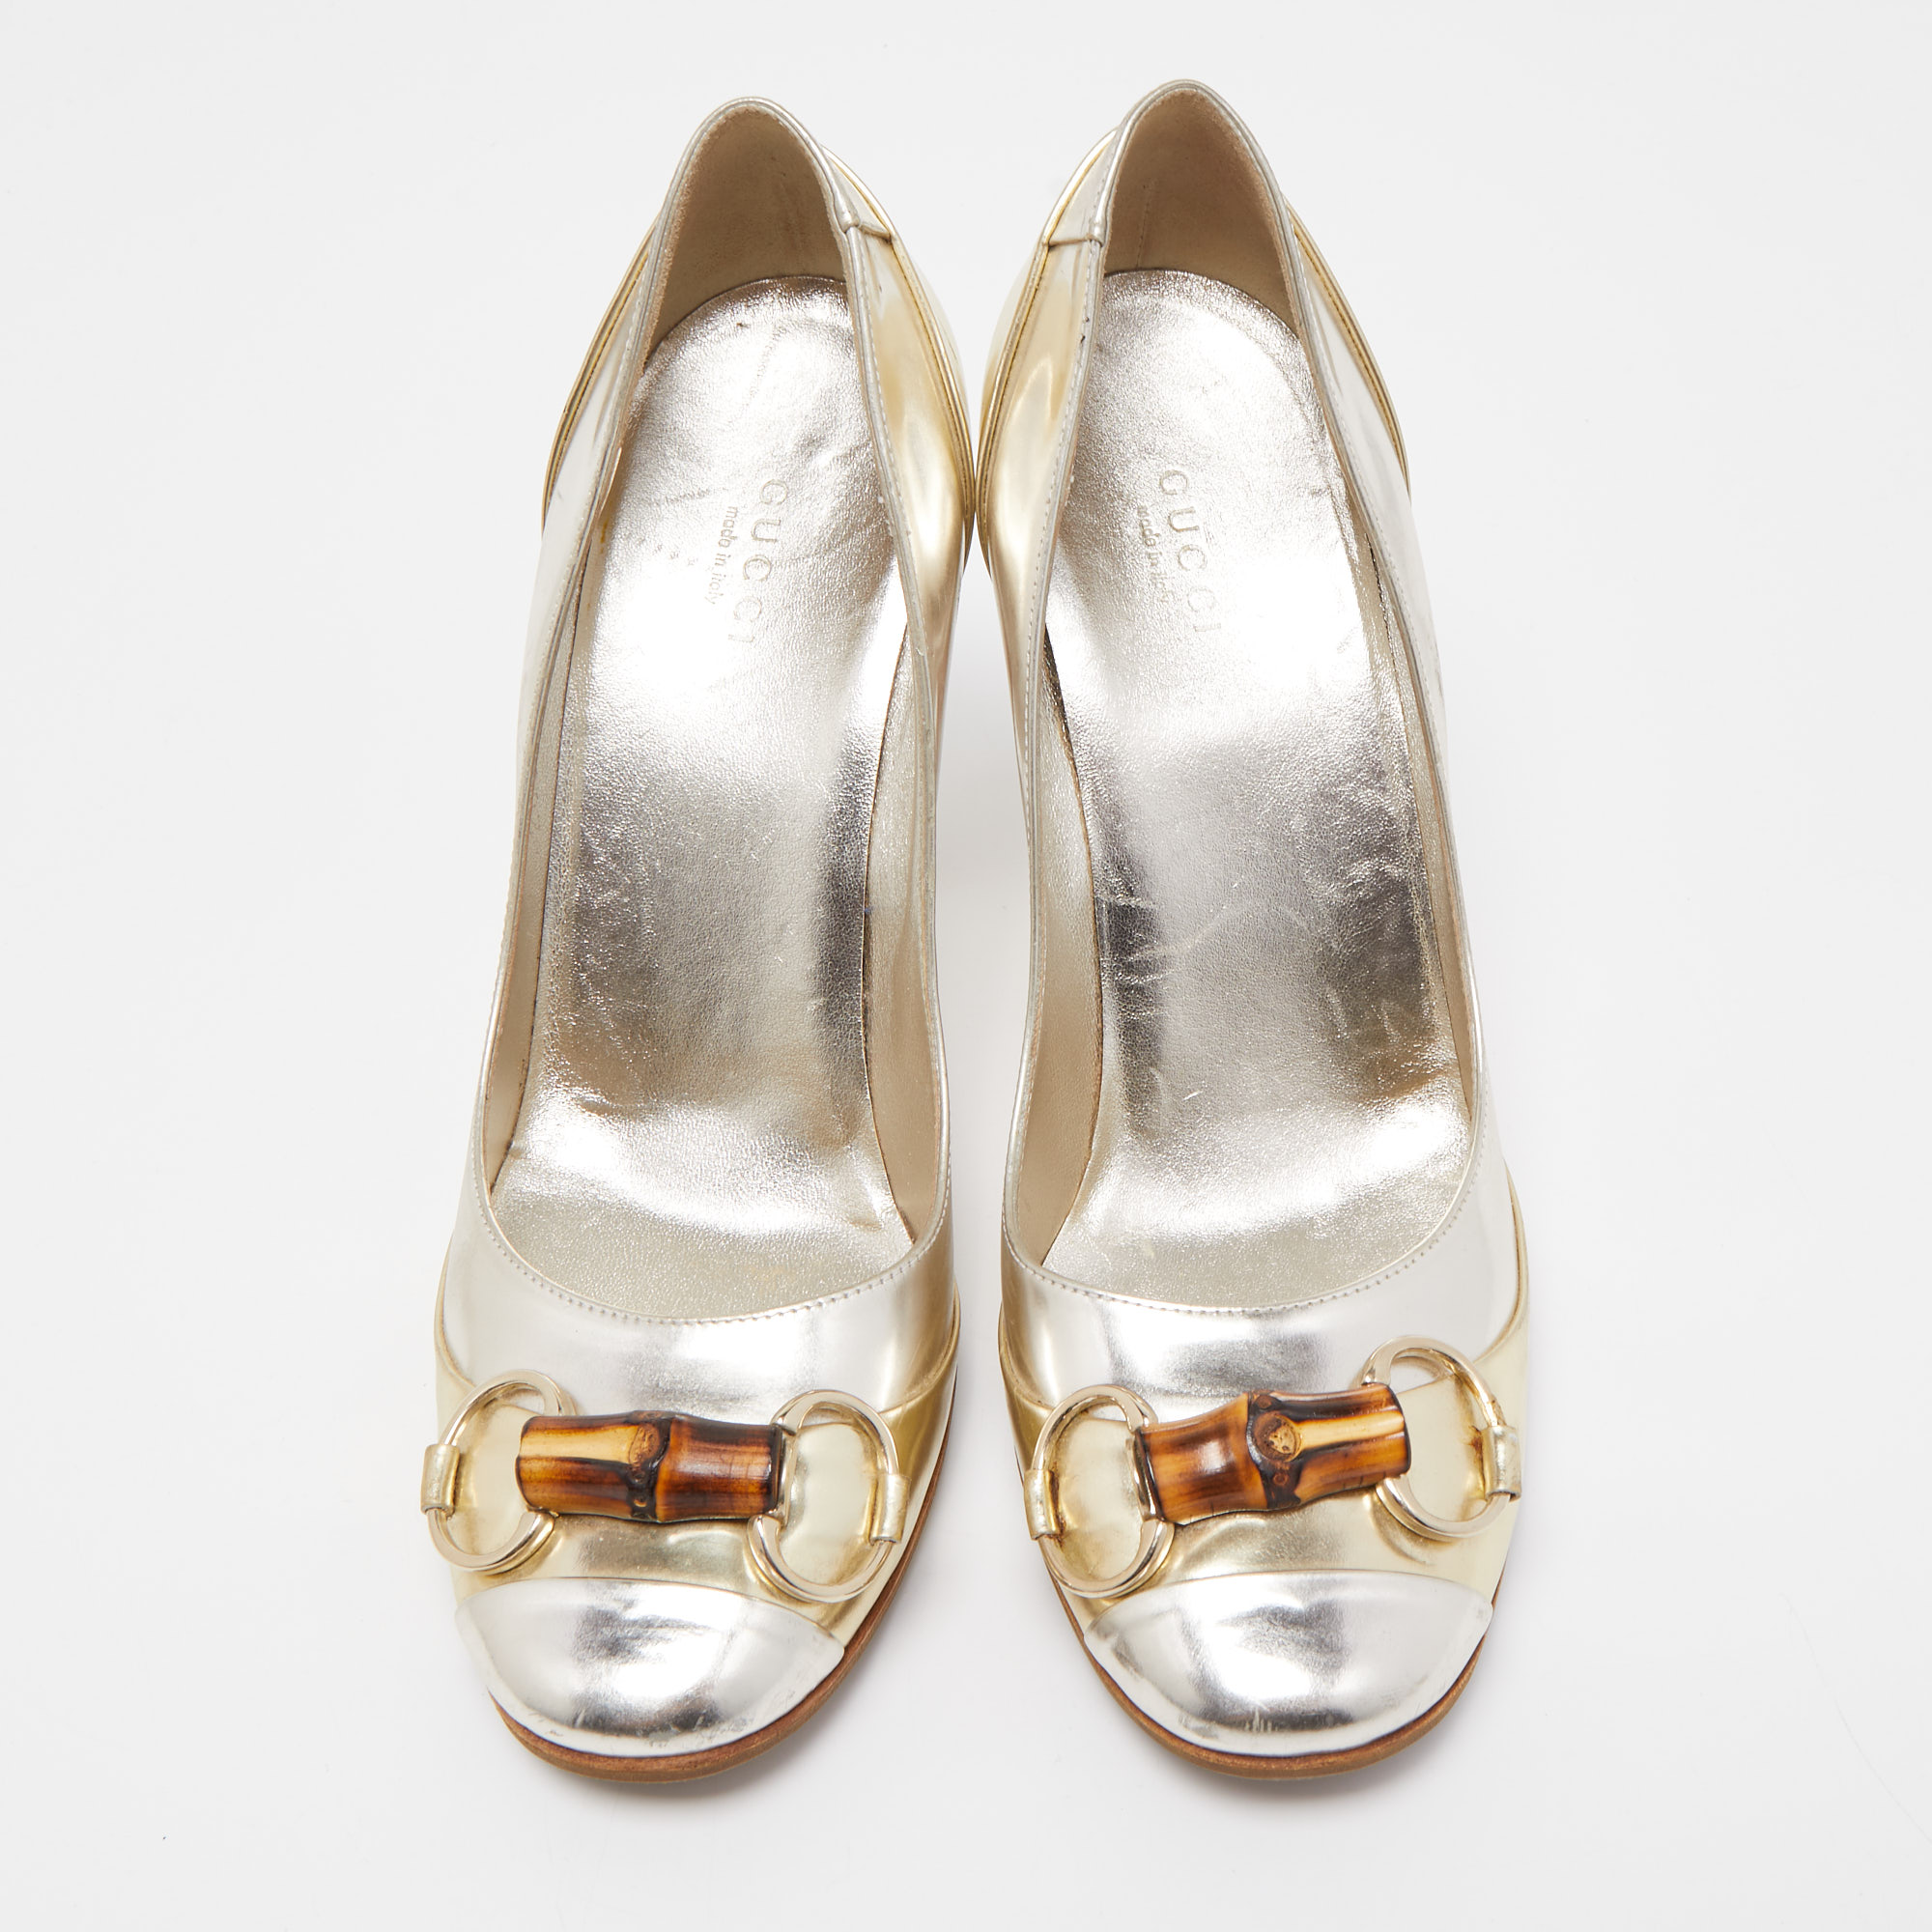 Gucci Gold/Silver Leather Bamboo Horsebit Pumps Size 39